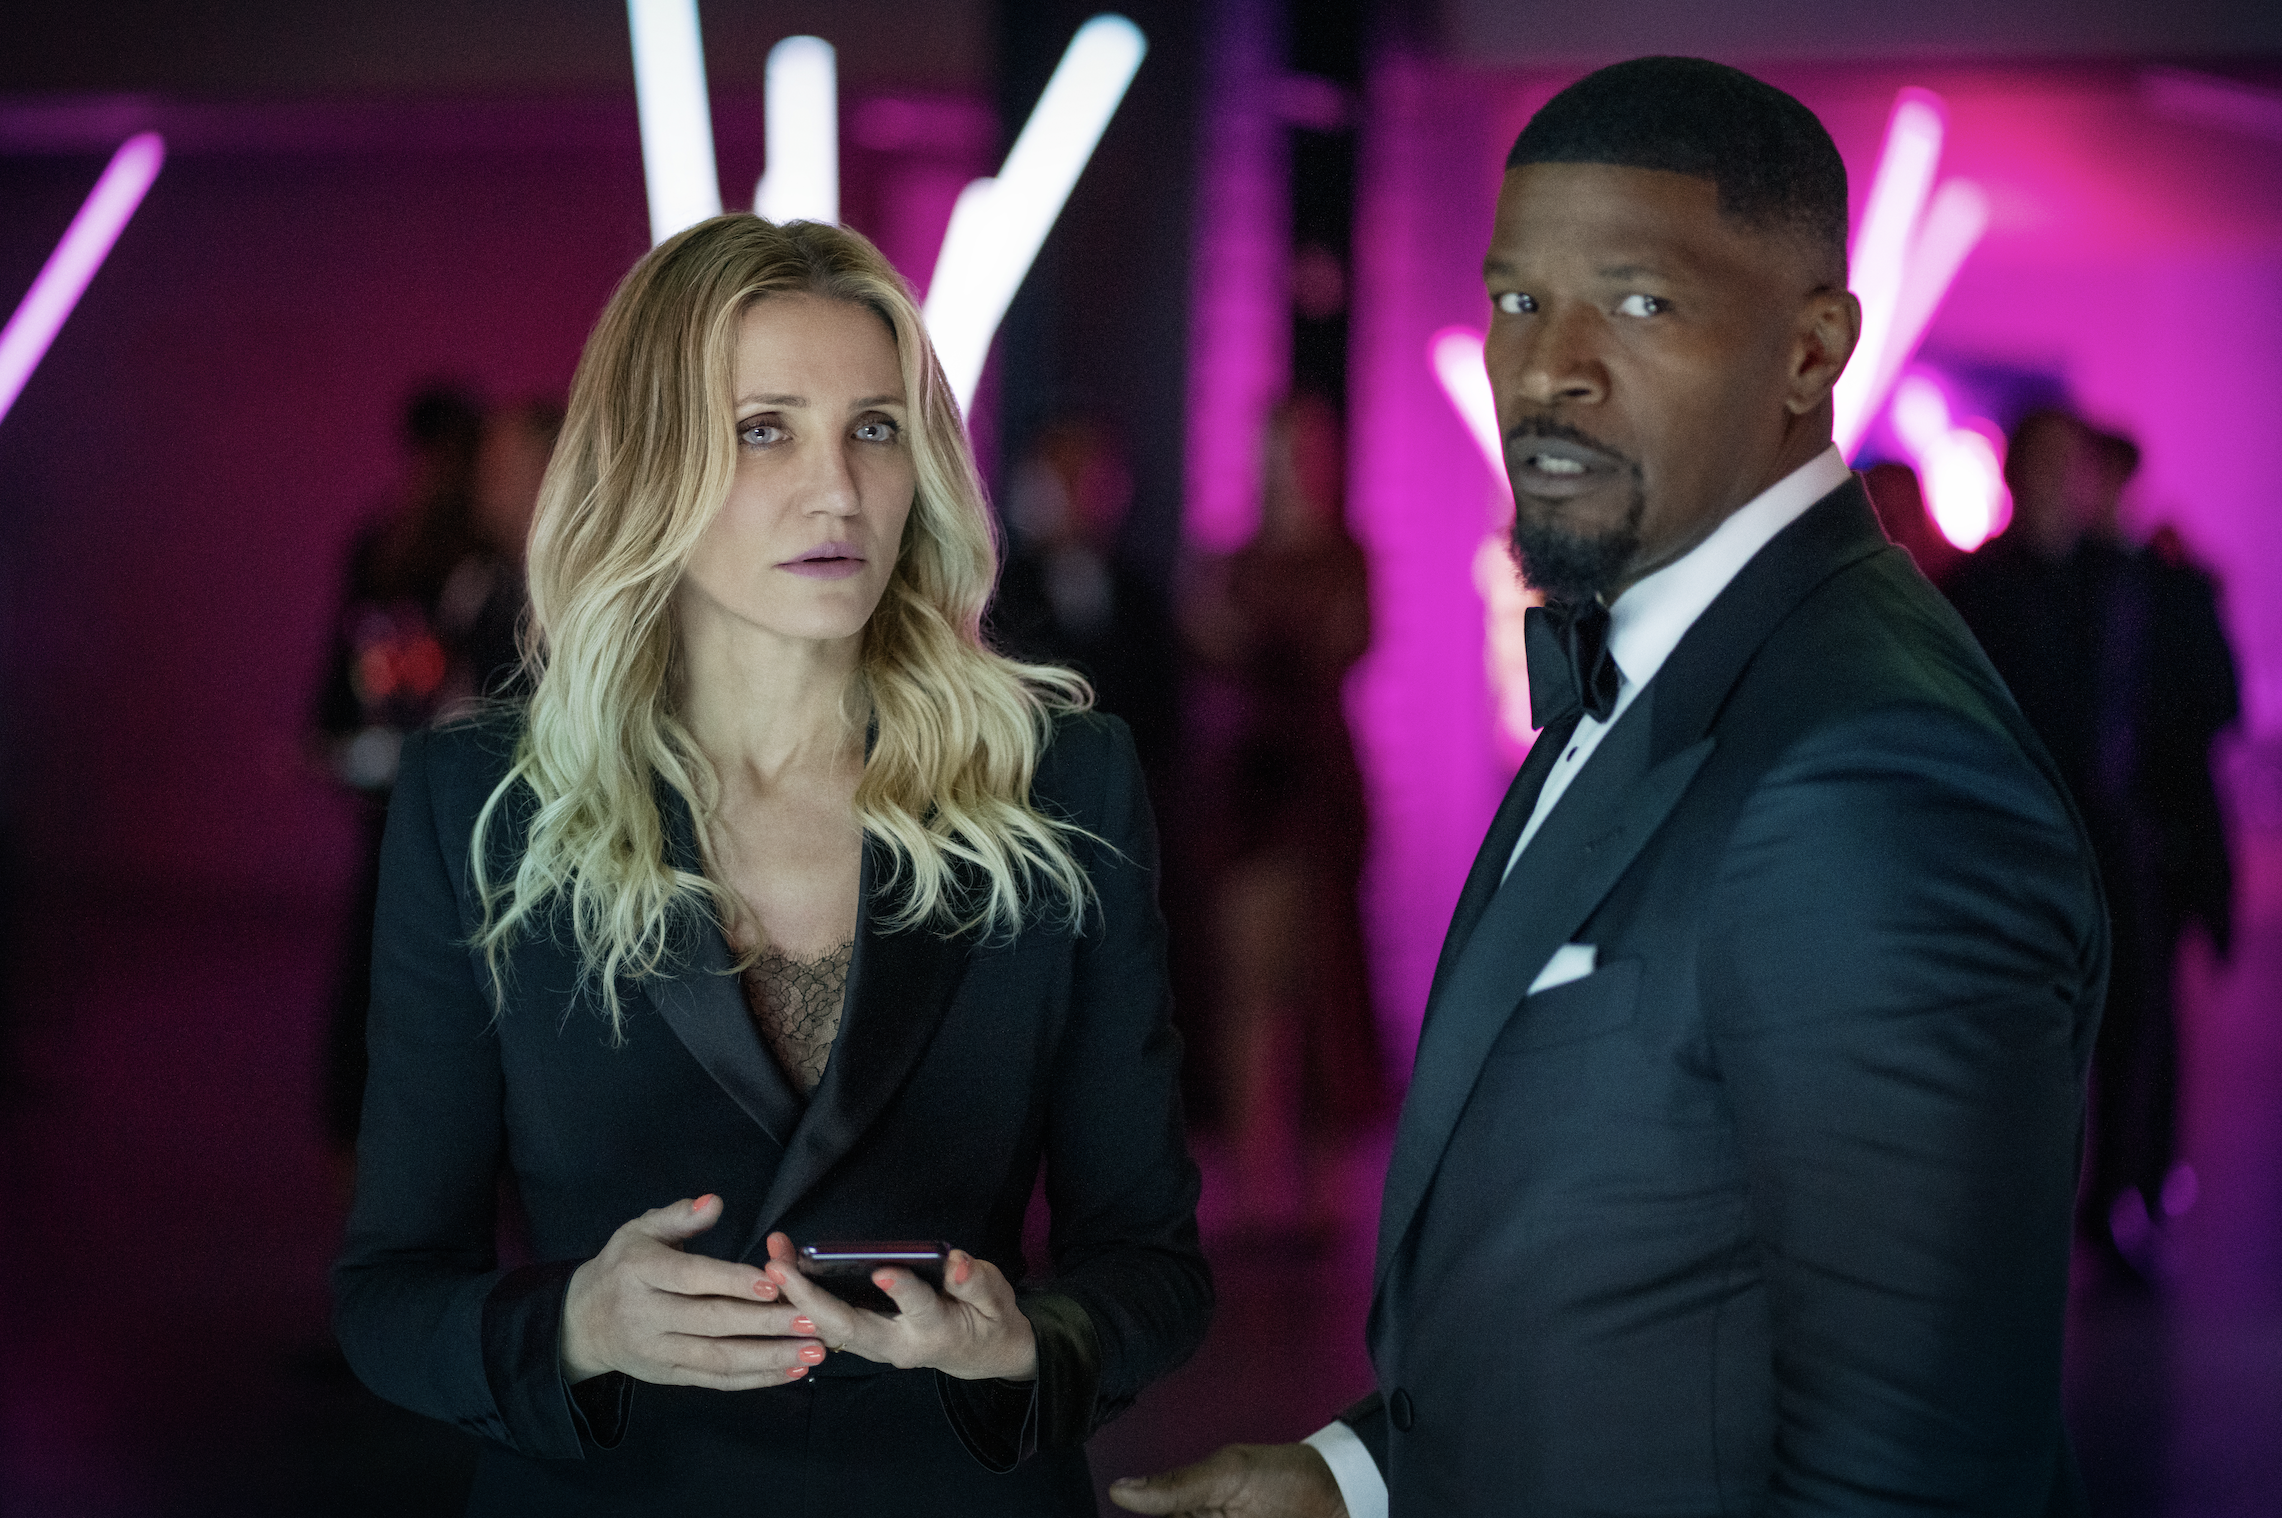 Bond, Jamie Bond: Secret Agent Foxx & Cameron Diaz Are ‘Back In Action’ In First Look At Netflix Spy Comedy